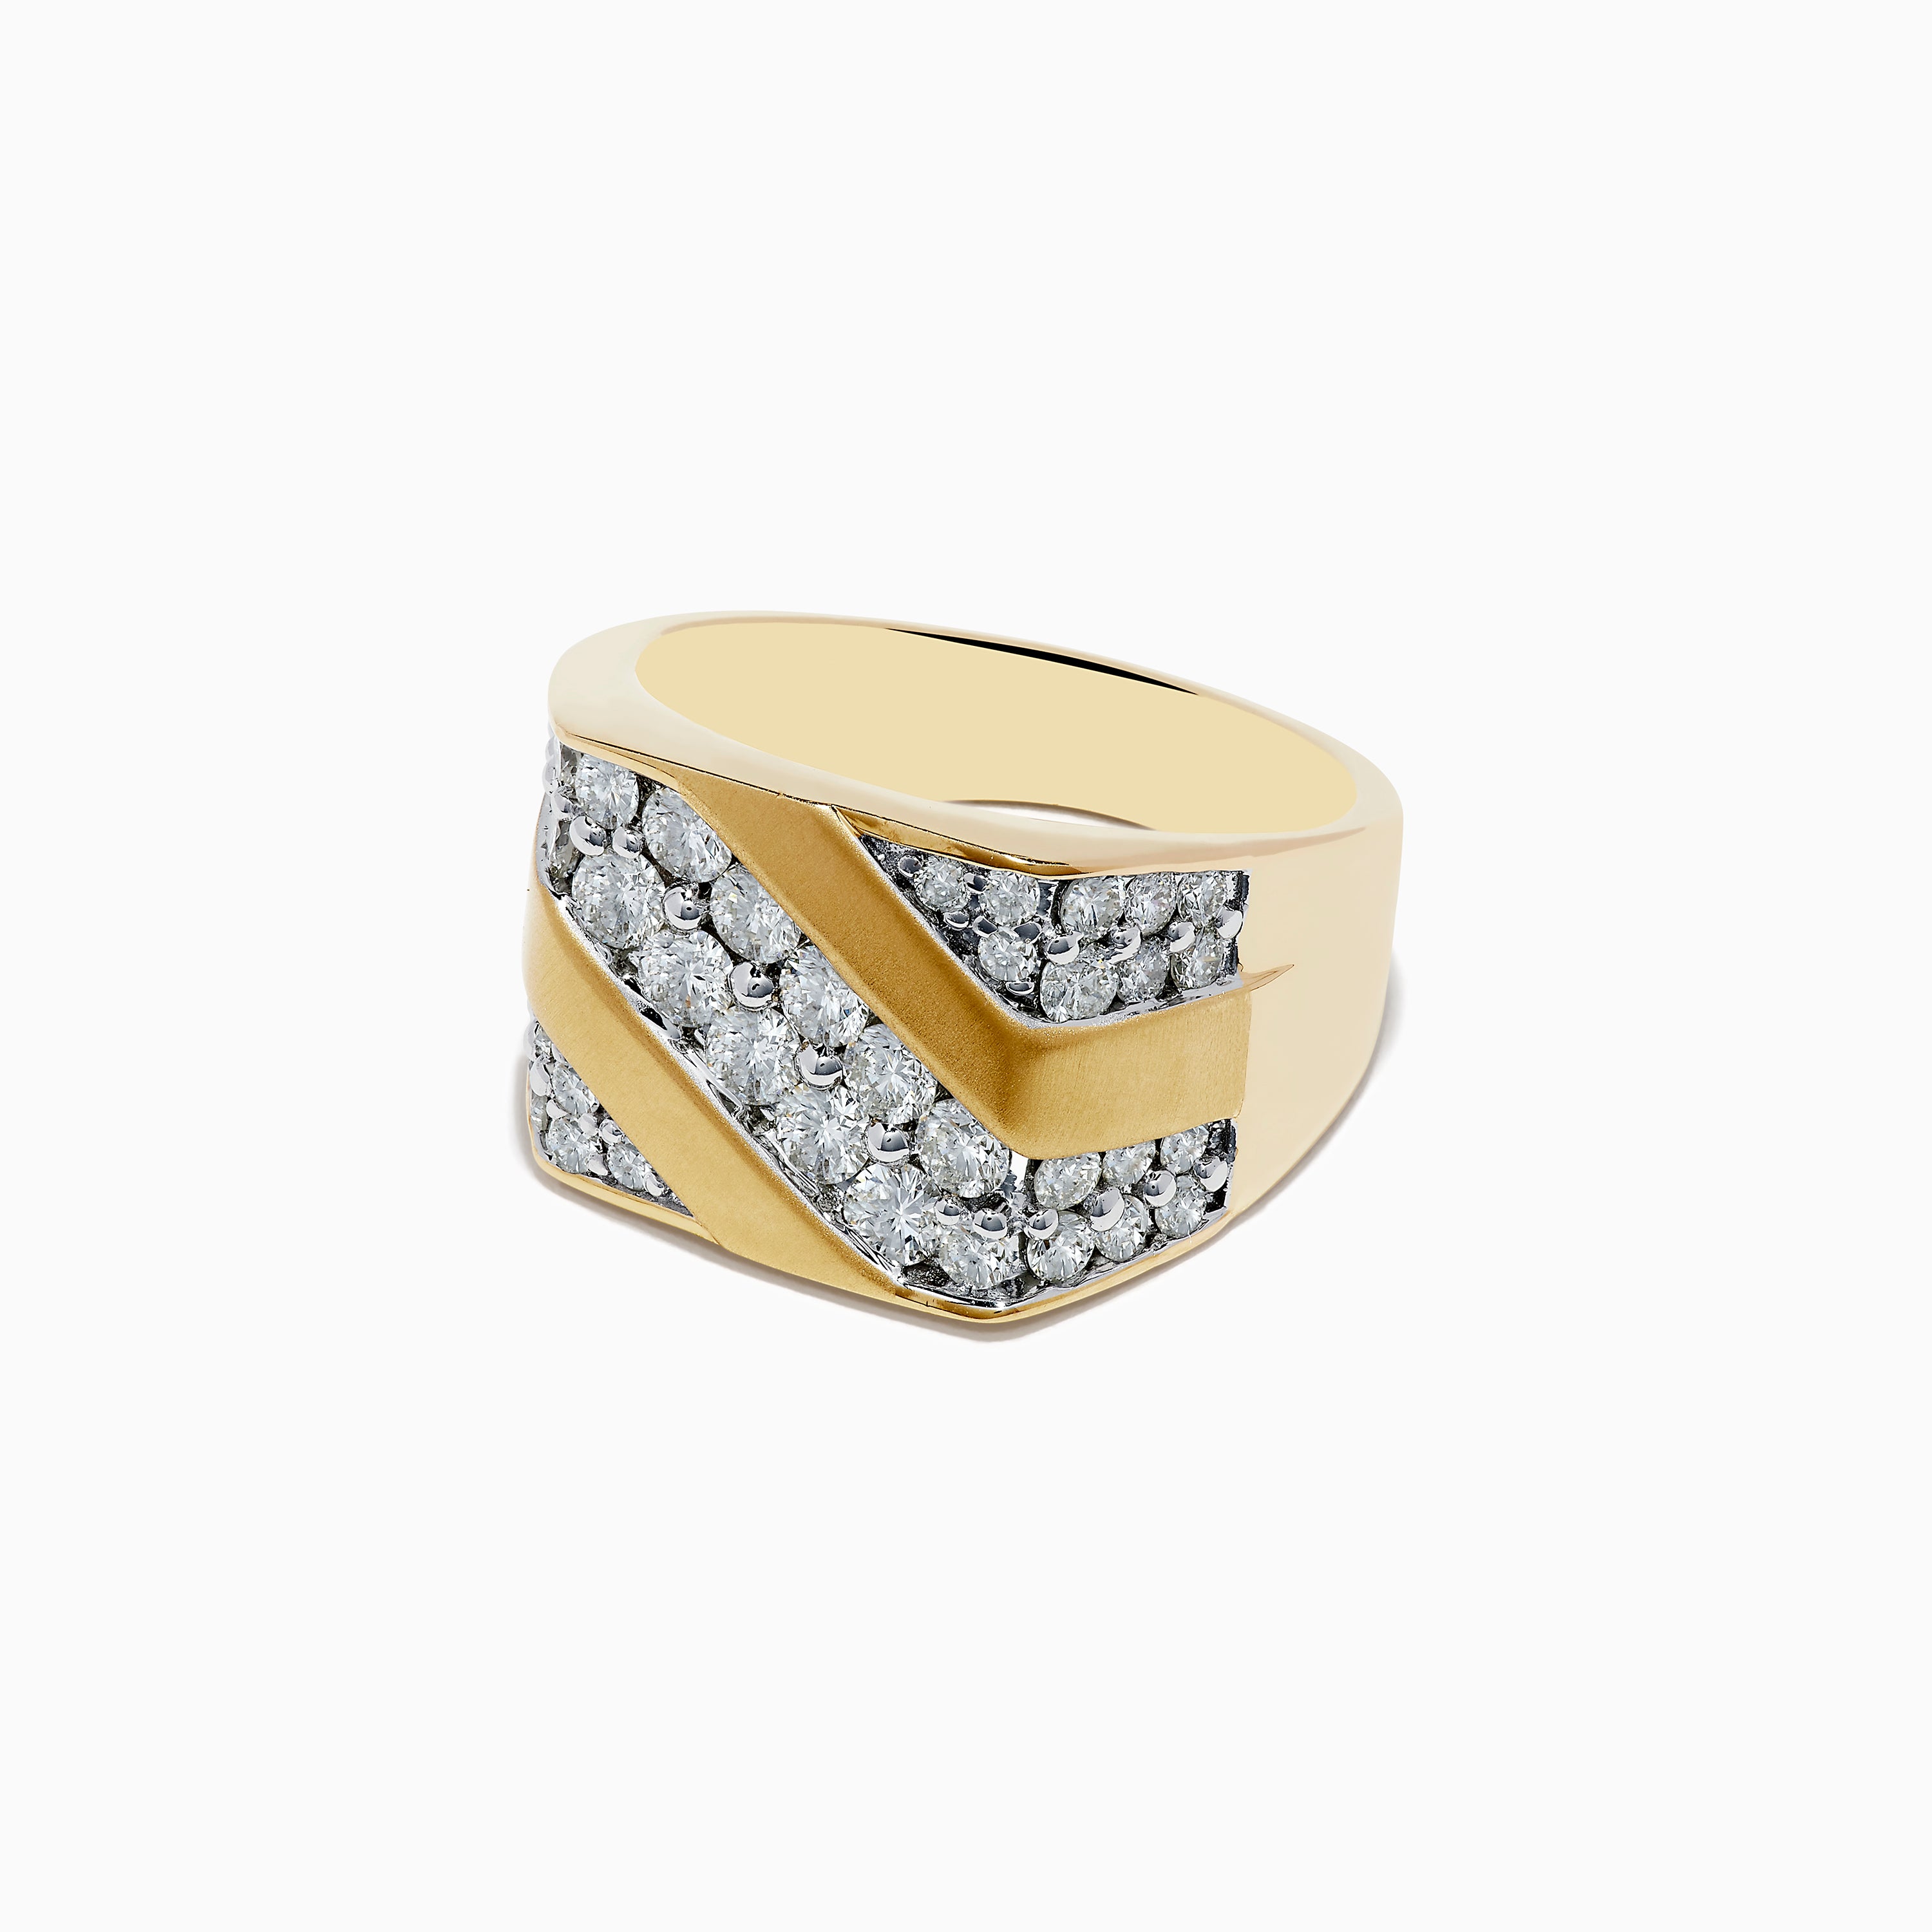 DANIEL GOLD RING | Gold rings fashion, Mens gold rings, Mens gold jewelry